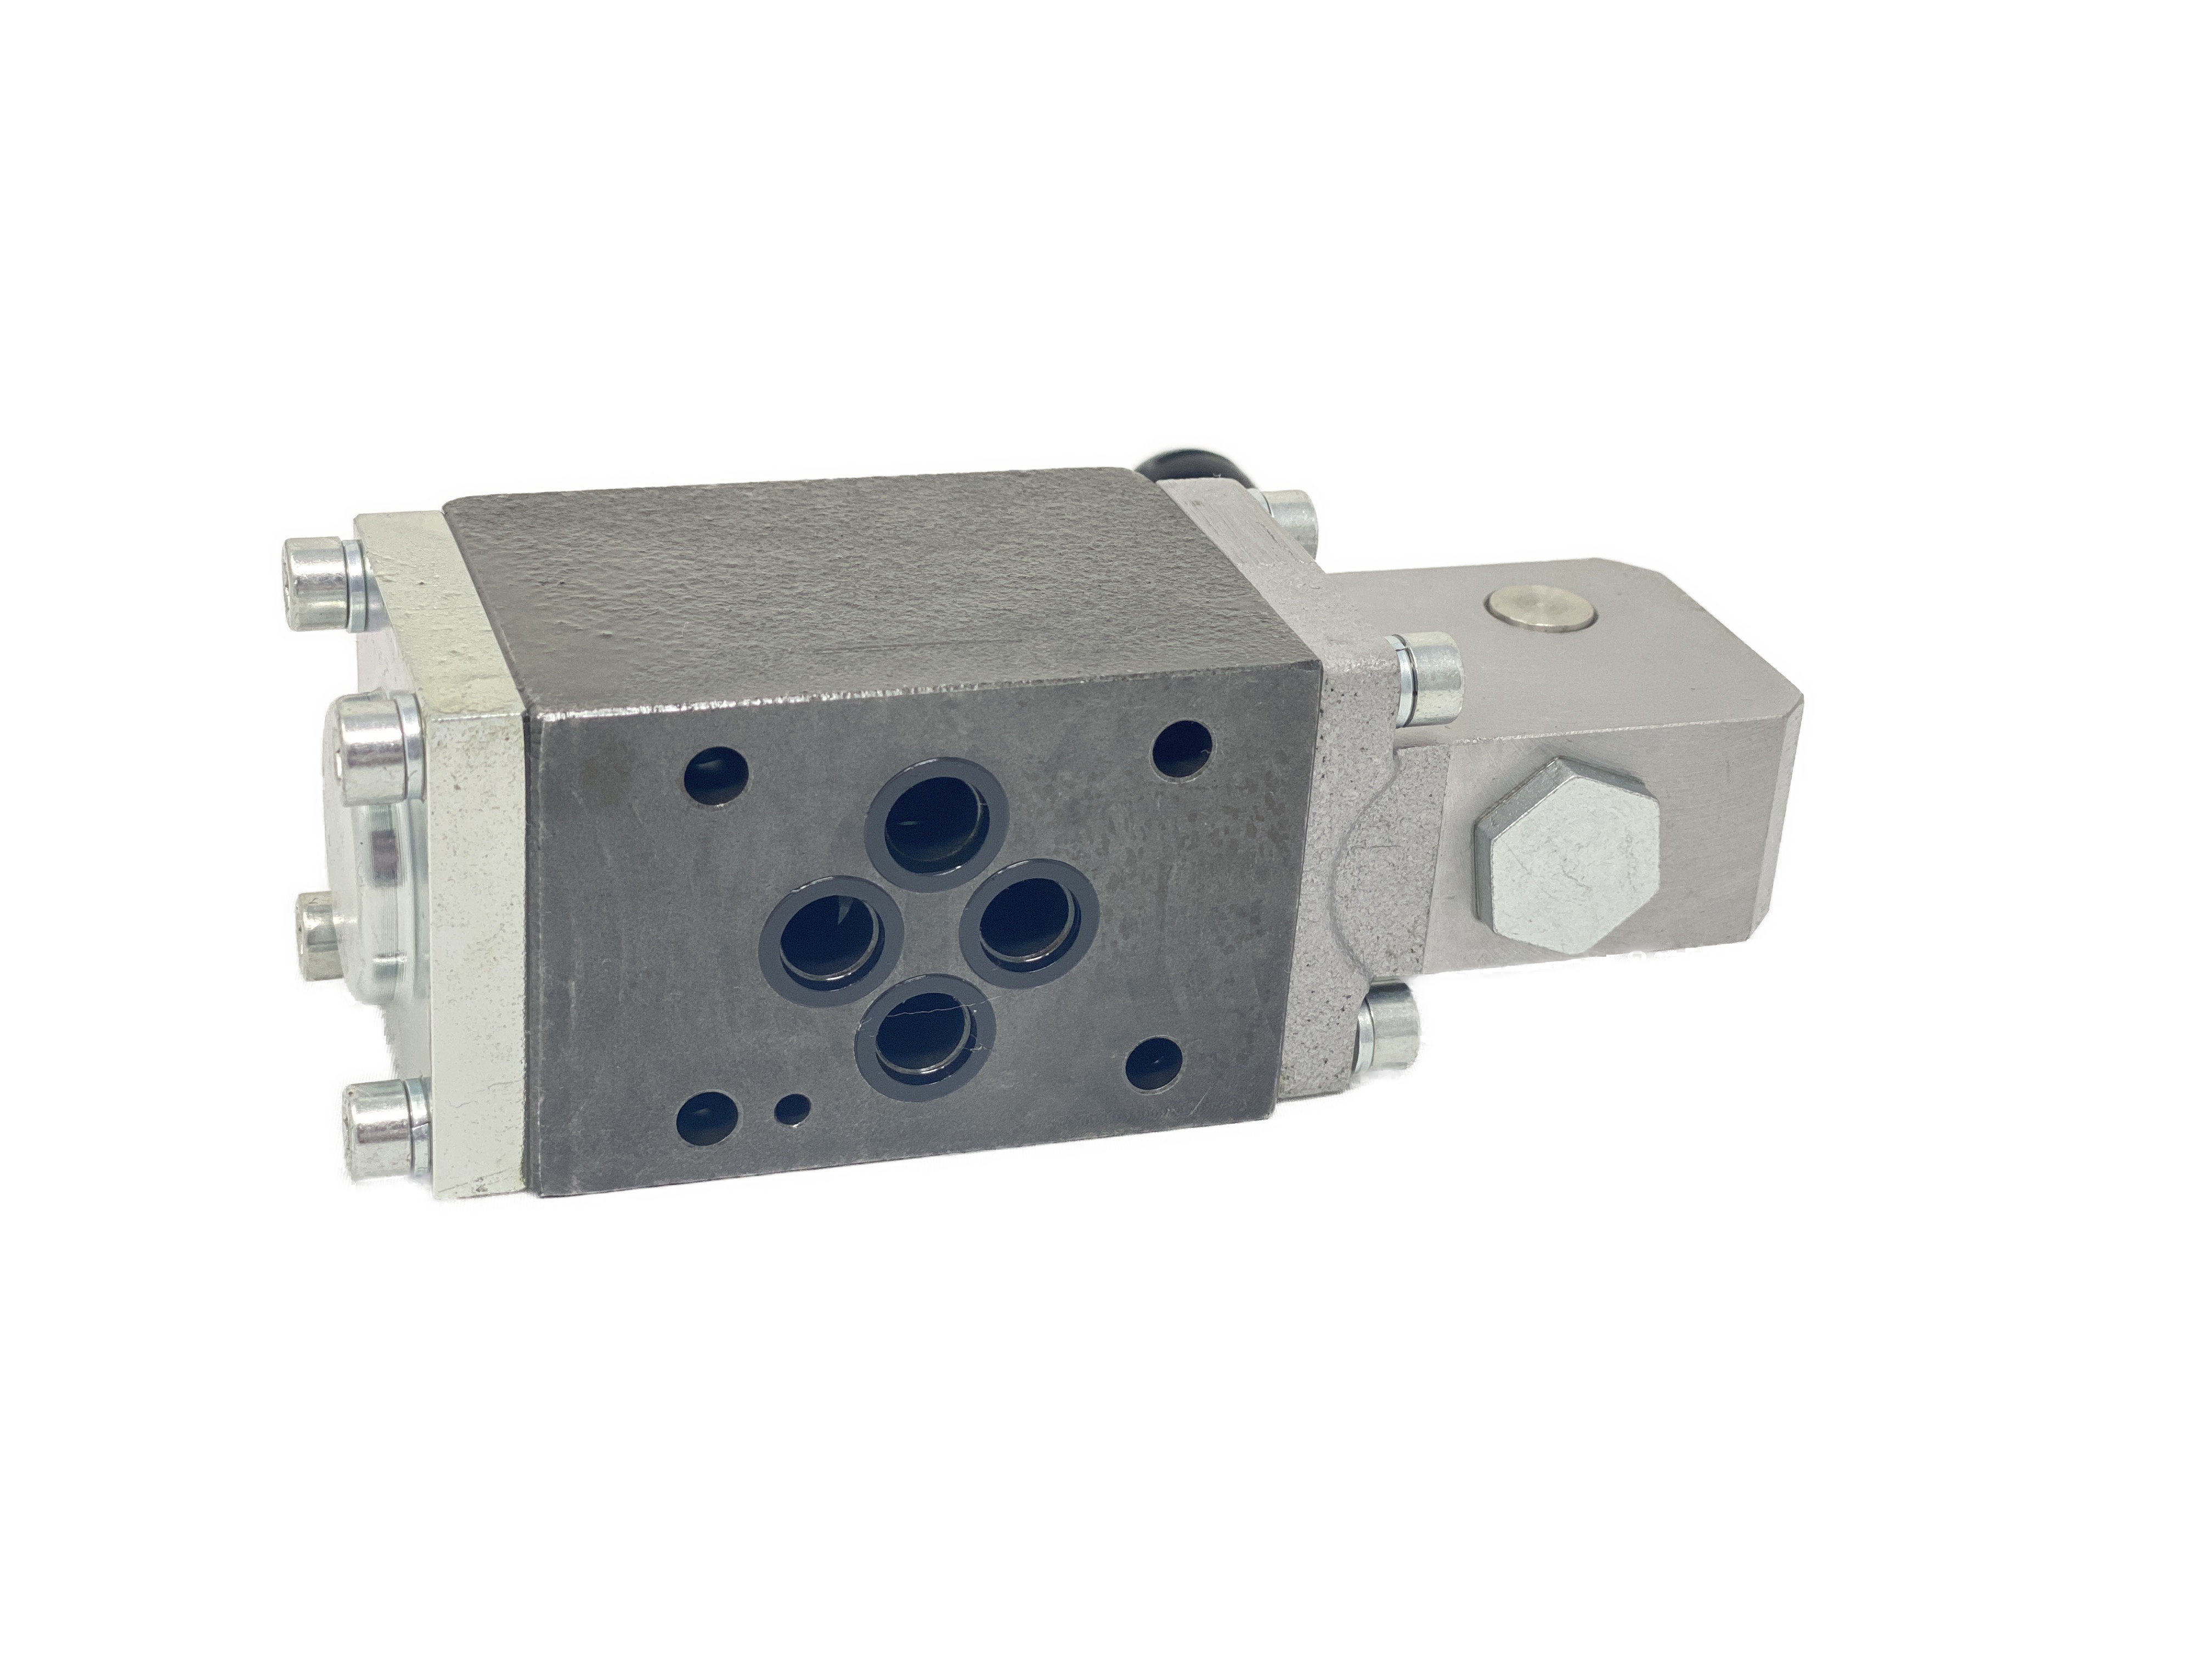 RPR3-062H11/A1 : Argo Hytos Directional Control Valve, Lever Operated, D03 (NG6), 21GPM, 5100psi, 2P4W, Spring Return, All Ports Open in Neutral